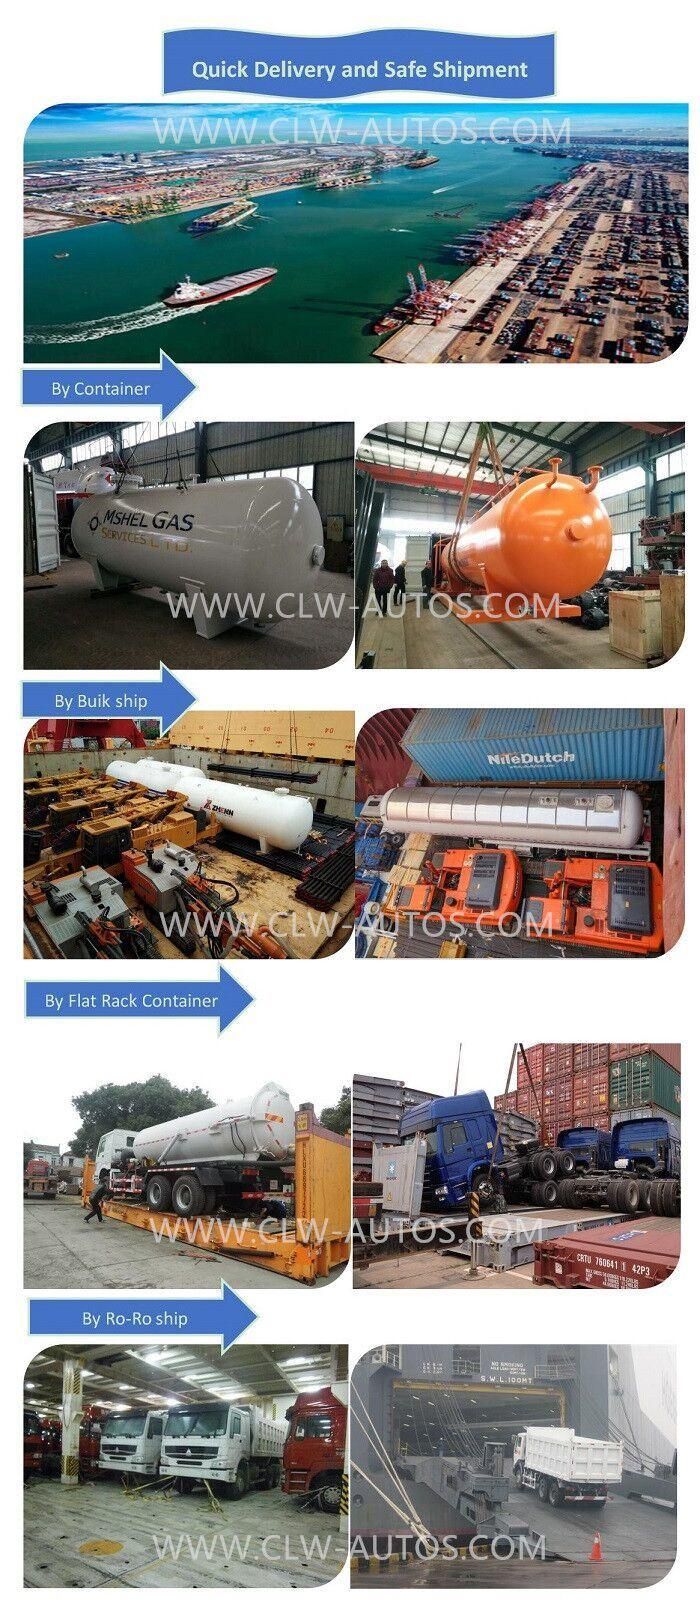 Dongfeng 153 Model 10cbm Water Bowser Water Tank Truck Cheap Price